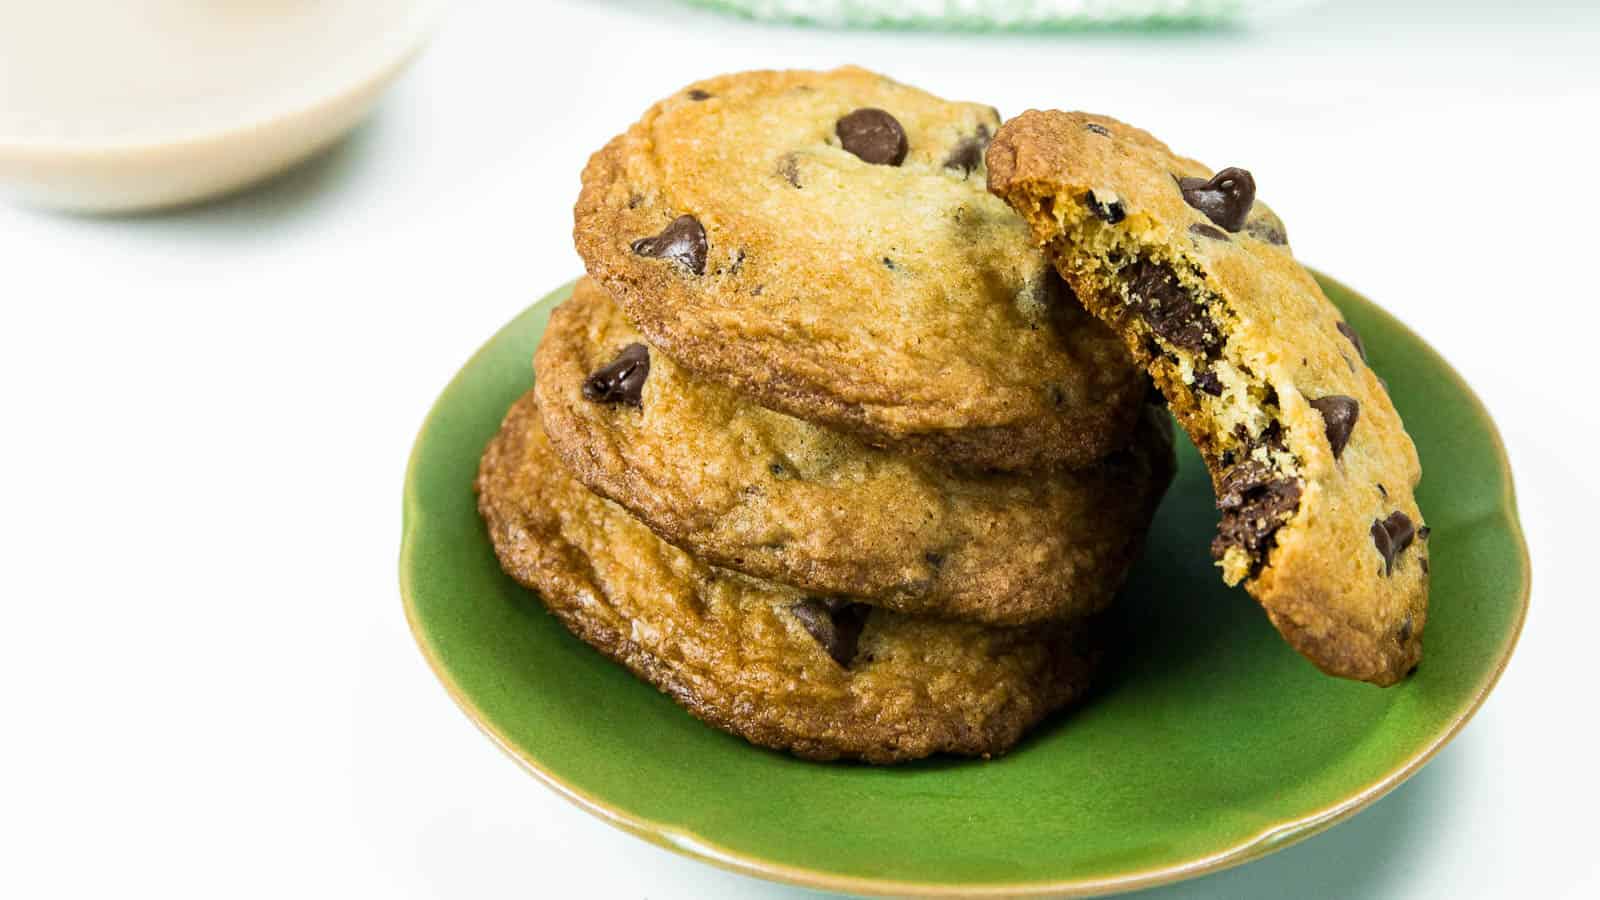 A stack of three cookies with chocolate chips sit on a green plate, while another cookie with a bite missing leans on the stack.